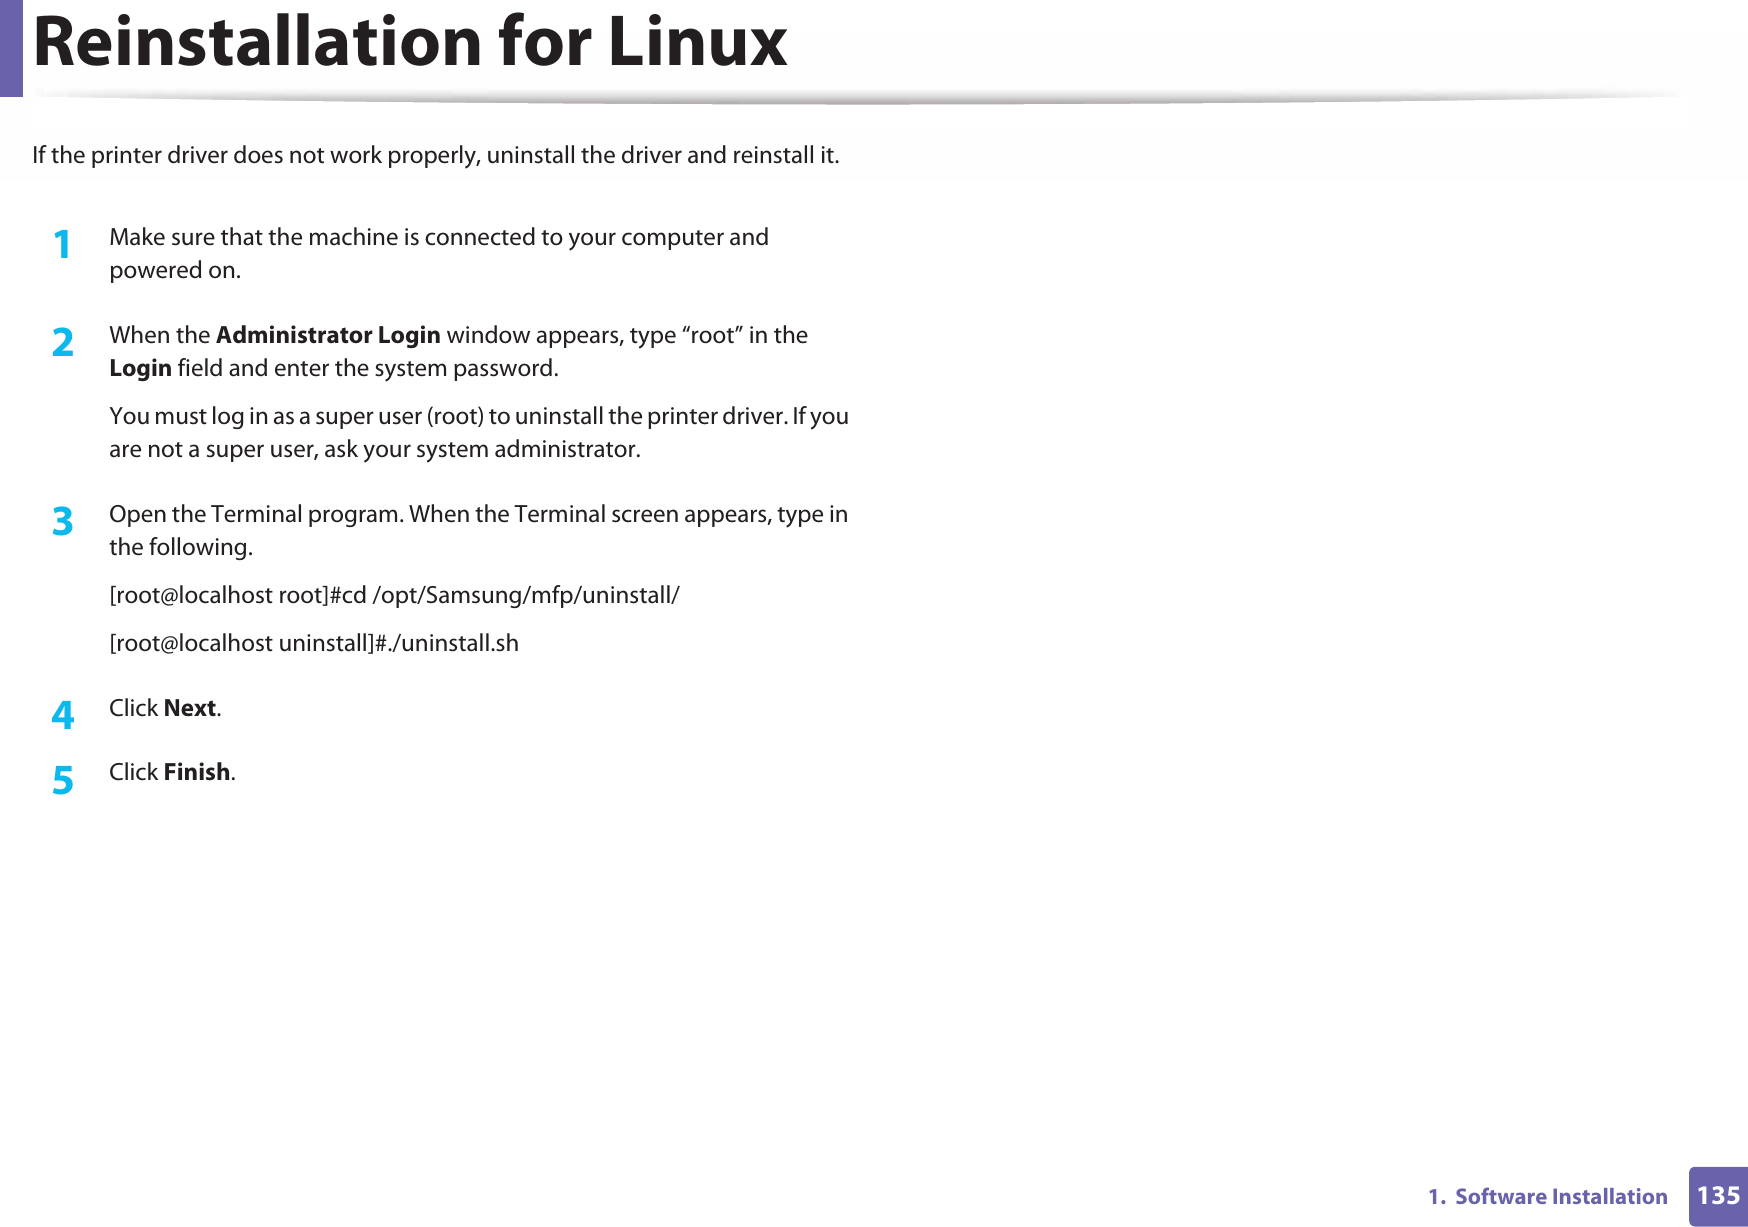 1351.  Software InstallationReinstallation for LinuxIf the printer driver does not work properly, uninstall the driver and reinstall it. 1Make sure that the machine is connected to your computer and powered on.2  When the Administrator Login window appears, type “root” in the Login field and enter the system password.You must log in as a super user (root) to uninstall the printer driver. If you are not a super user, ask your system administrator.3  Open the Terminal program. When the Terminal screen appears, type in the following.[root@localhost root]#cd /opt/Samsung/mfp/uninstall/[root@localhost uninstall]#./uninstall.sh4  Click Next. 5  Click Finish.